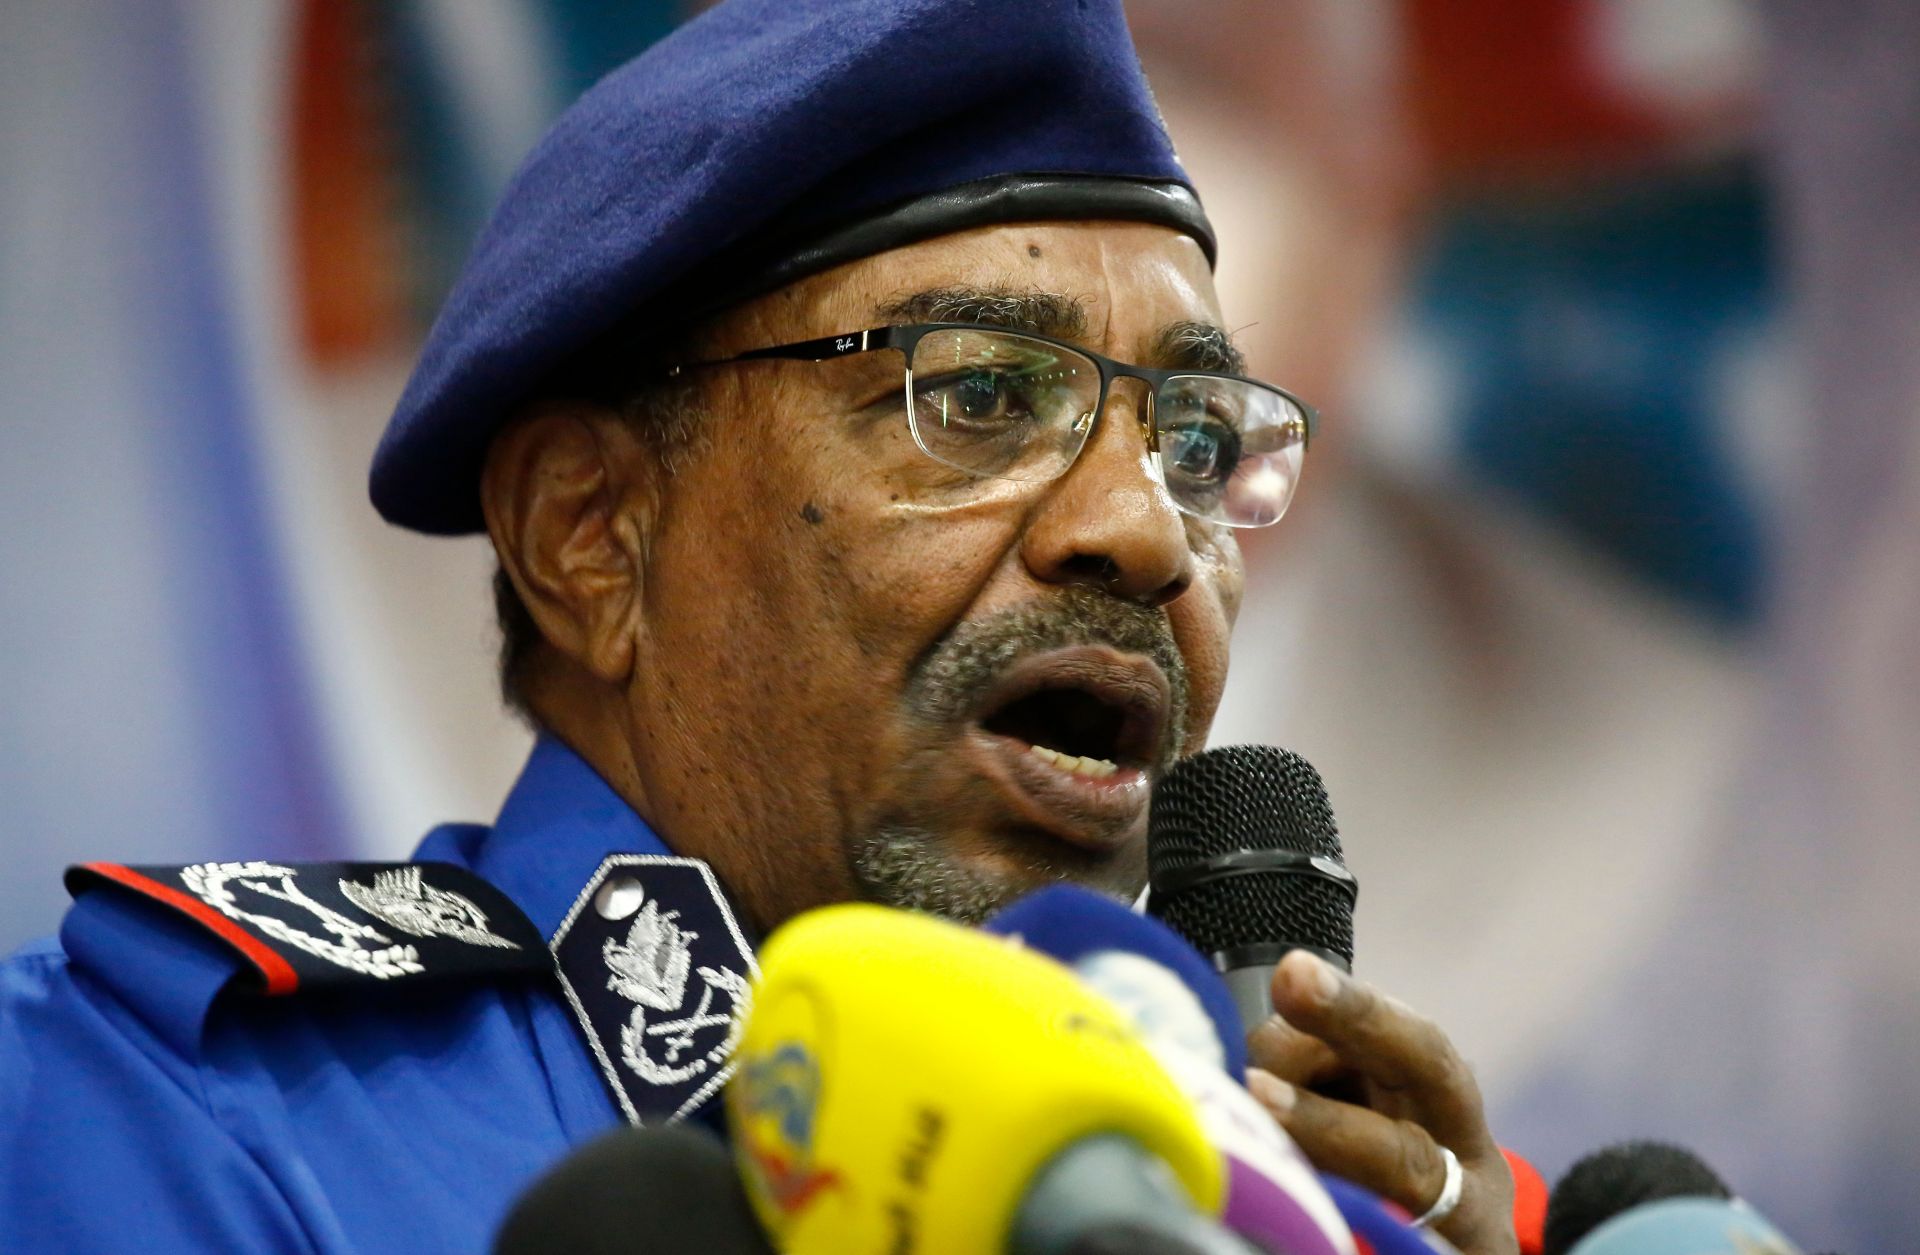 President Omar al Bashir has held the reins of power in Sudan since a coup in 1989. Persistent protests over economic conditions in the country are putting his government under pressure.